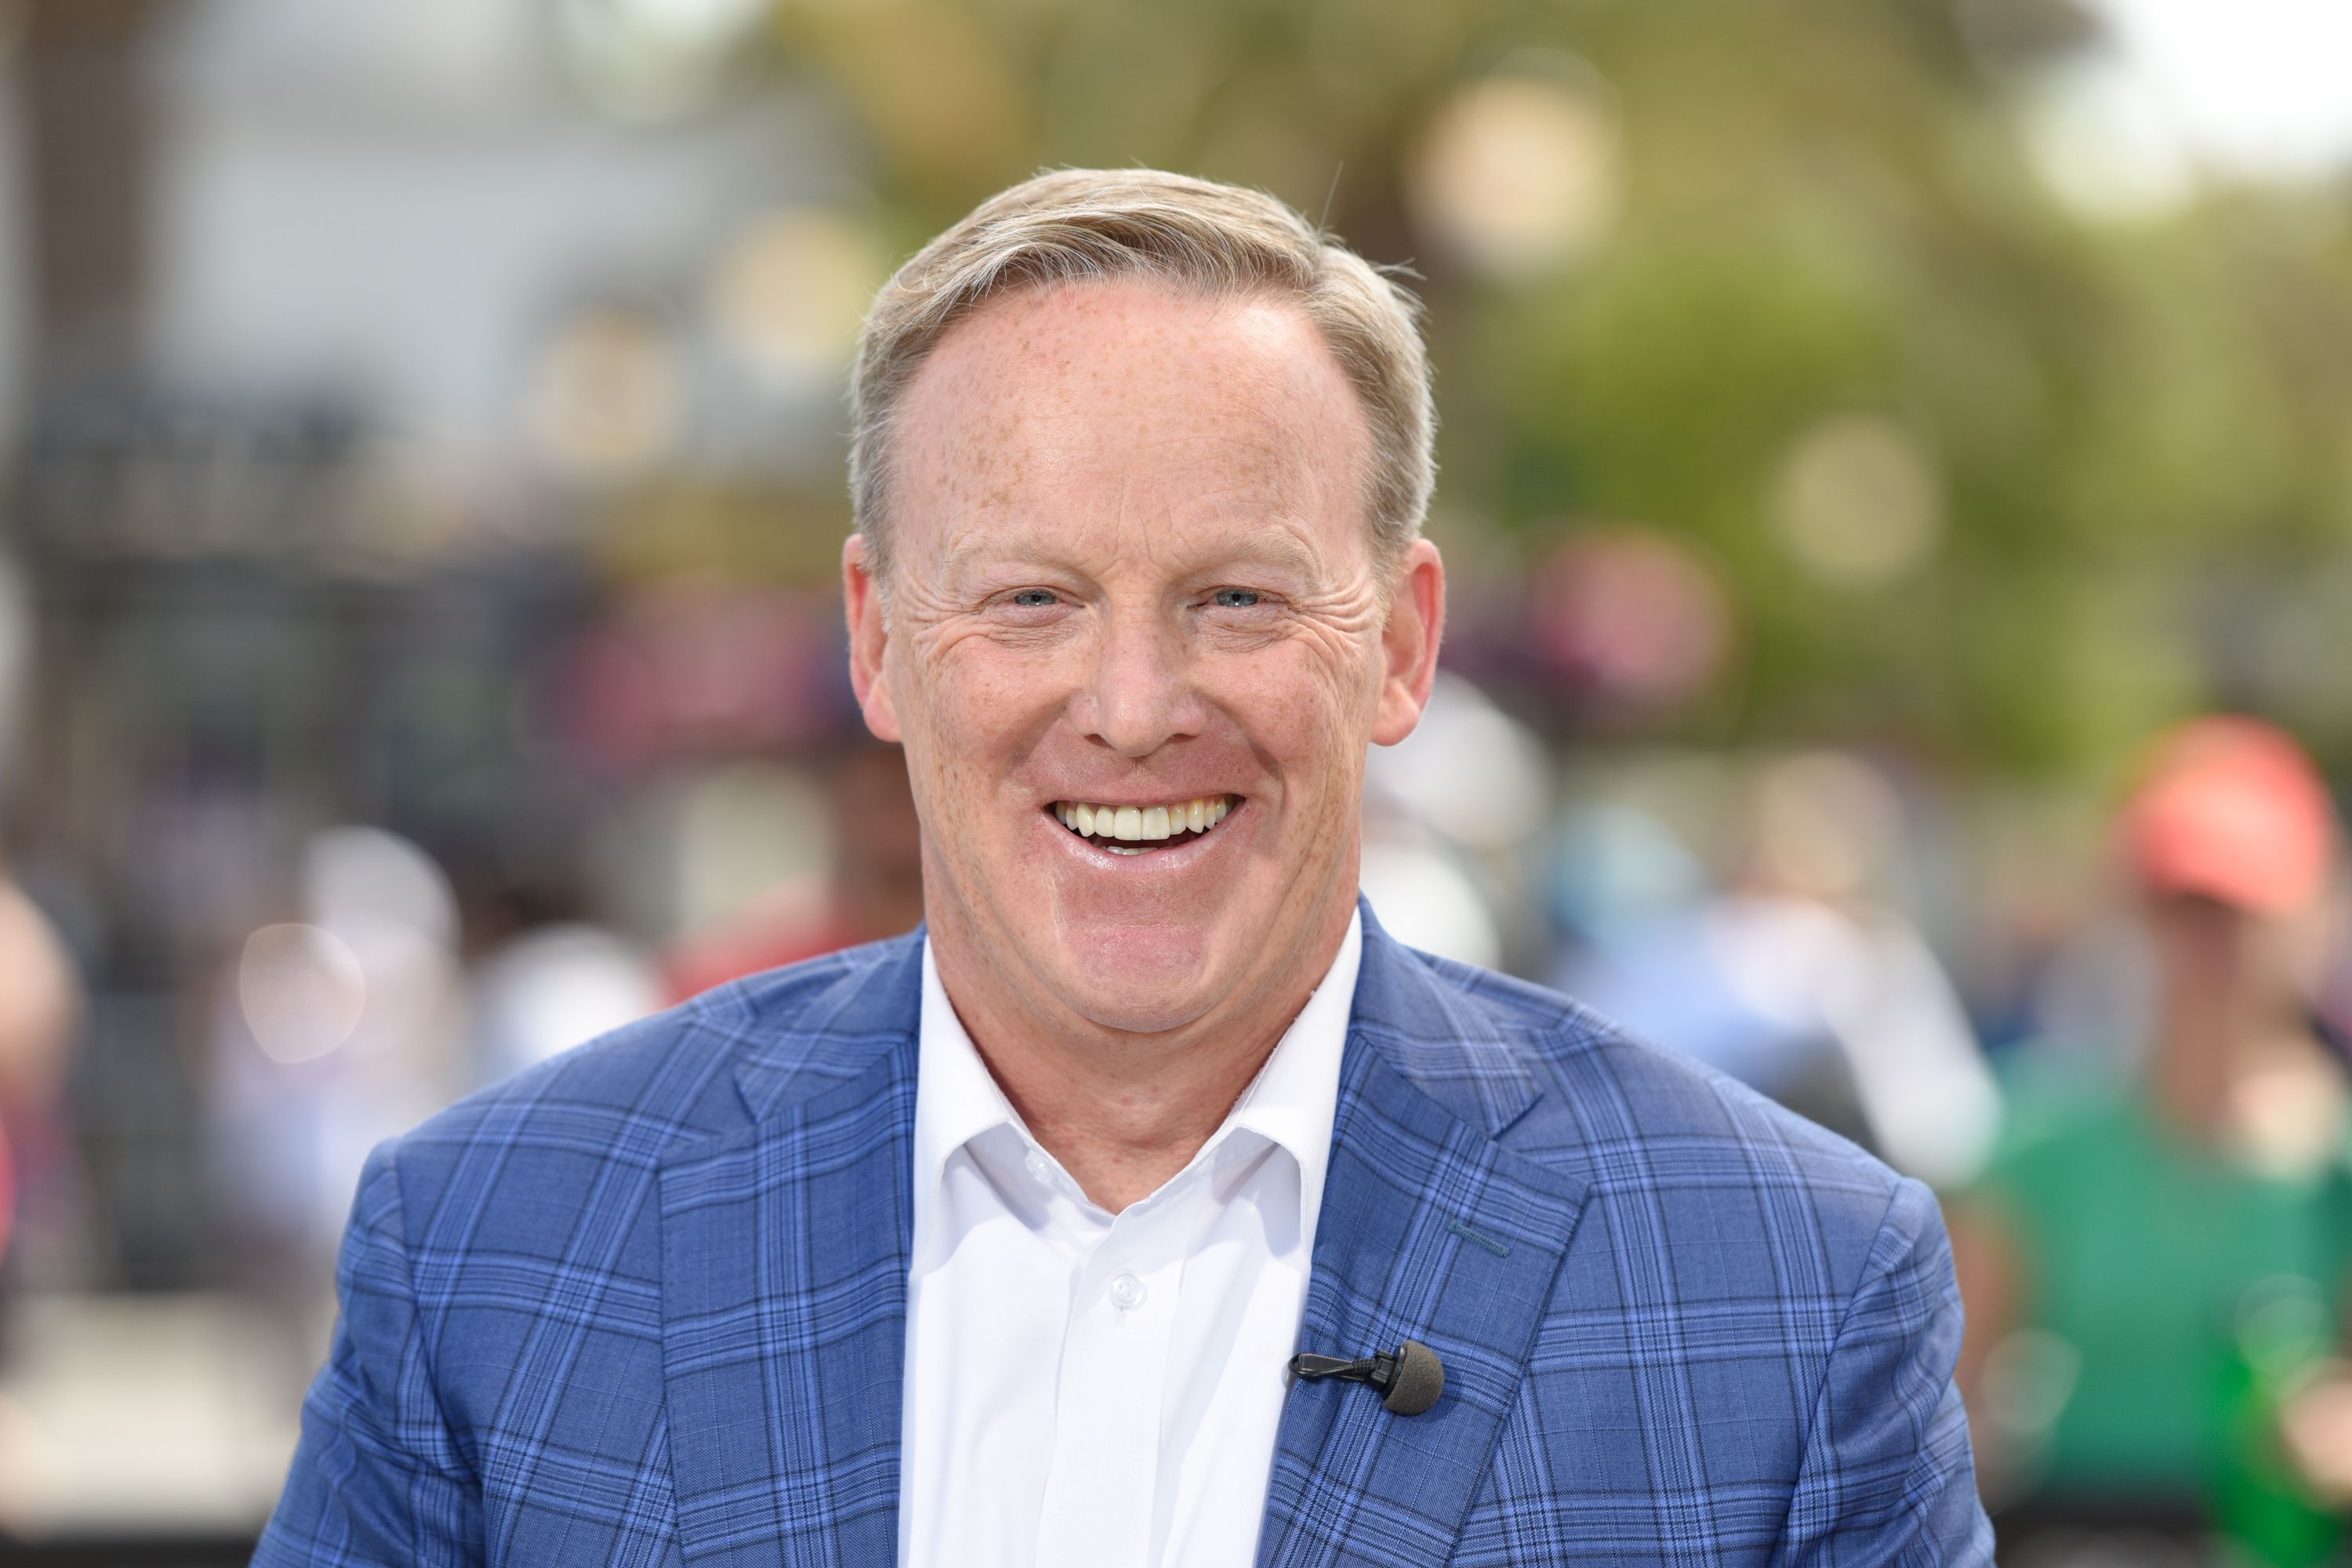 Sean Spicer previews his ‘Dancing with the Stars’ dance moves on ‘Fox & Friends’